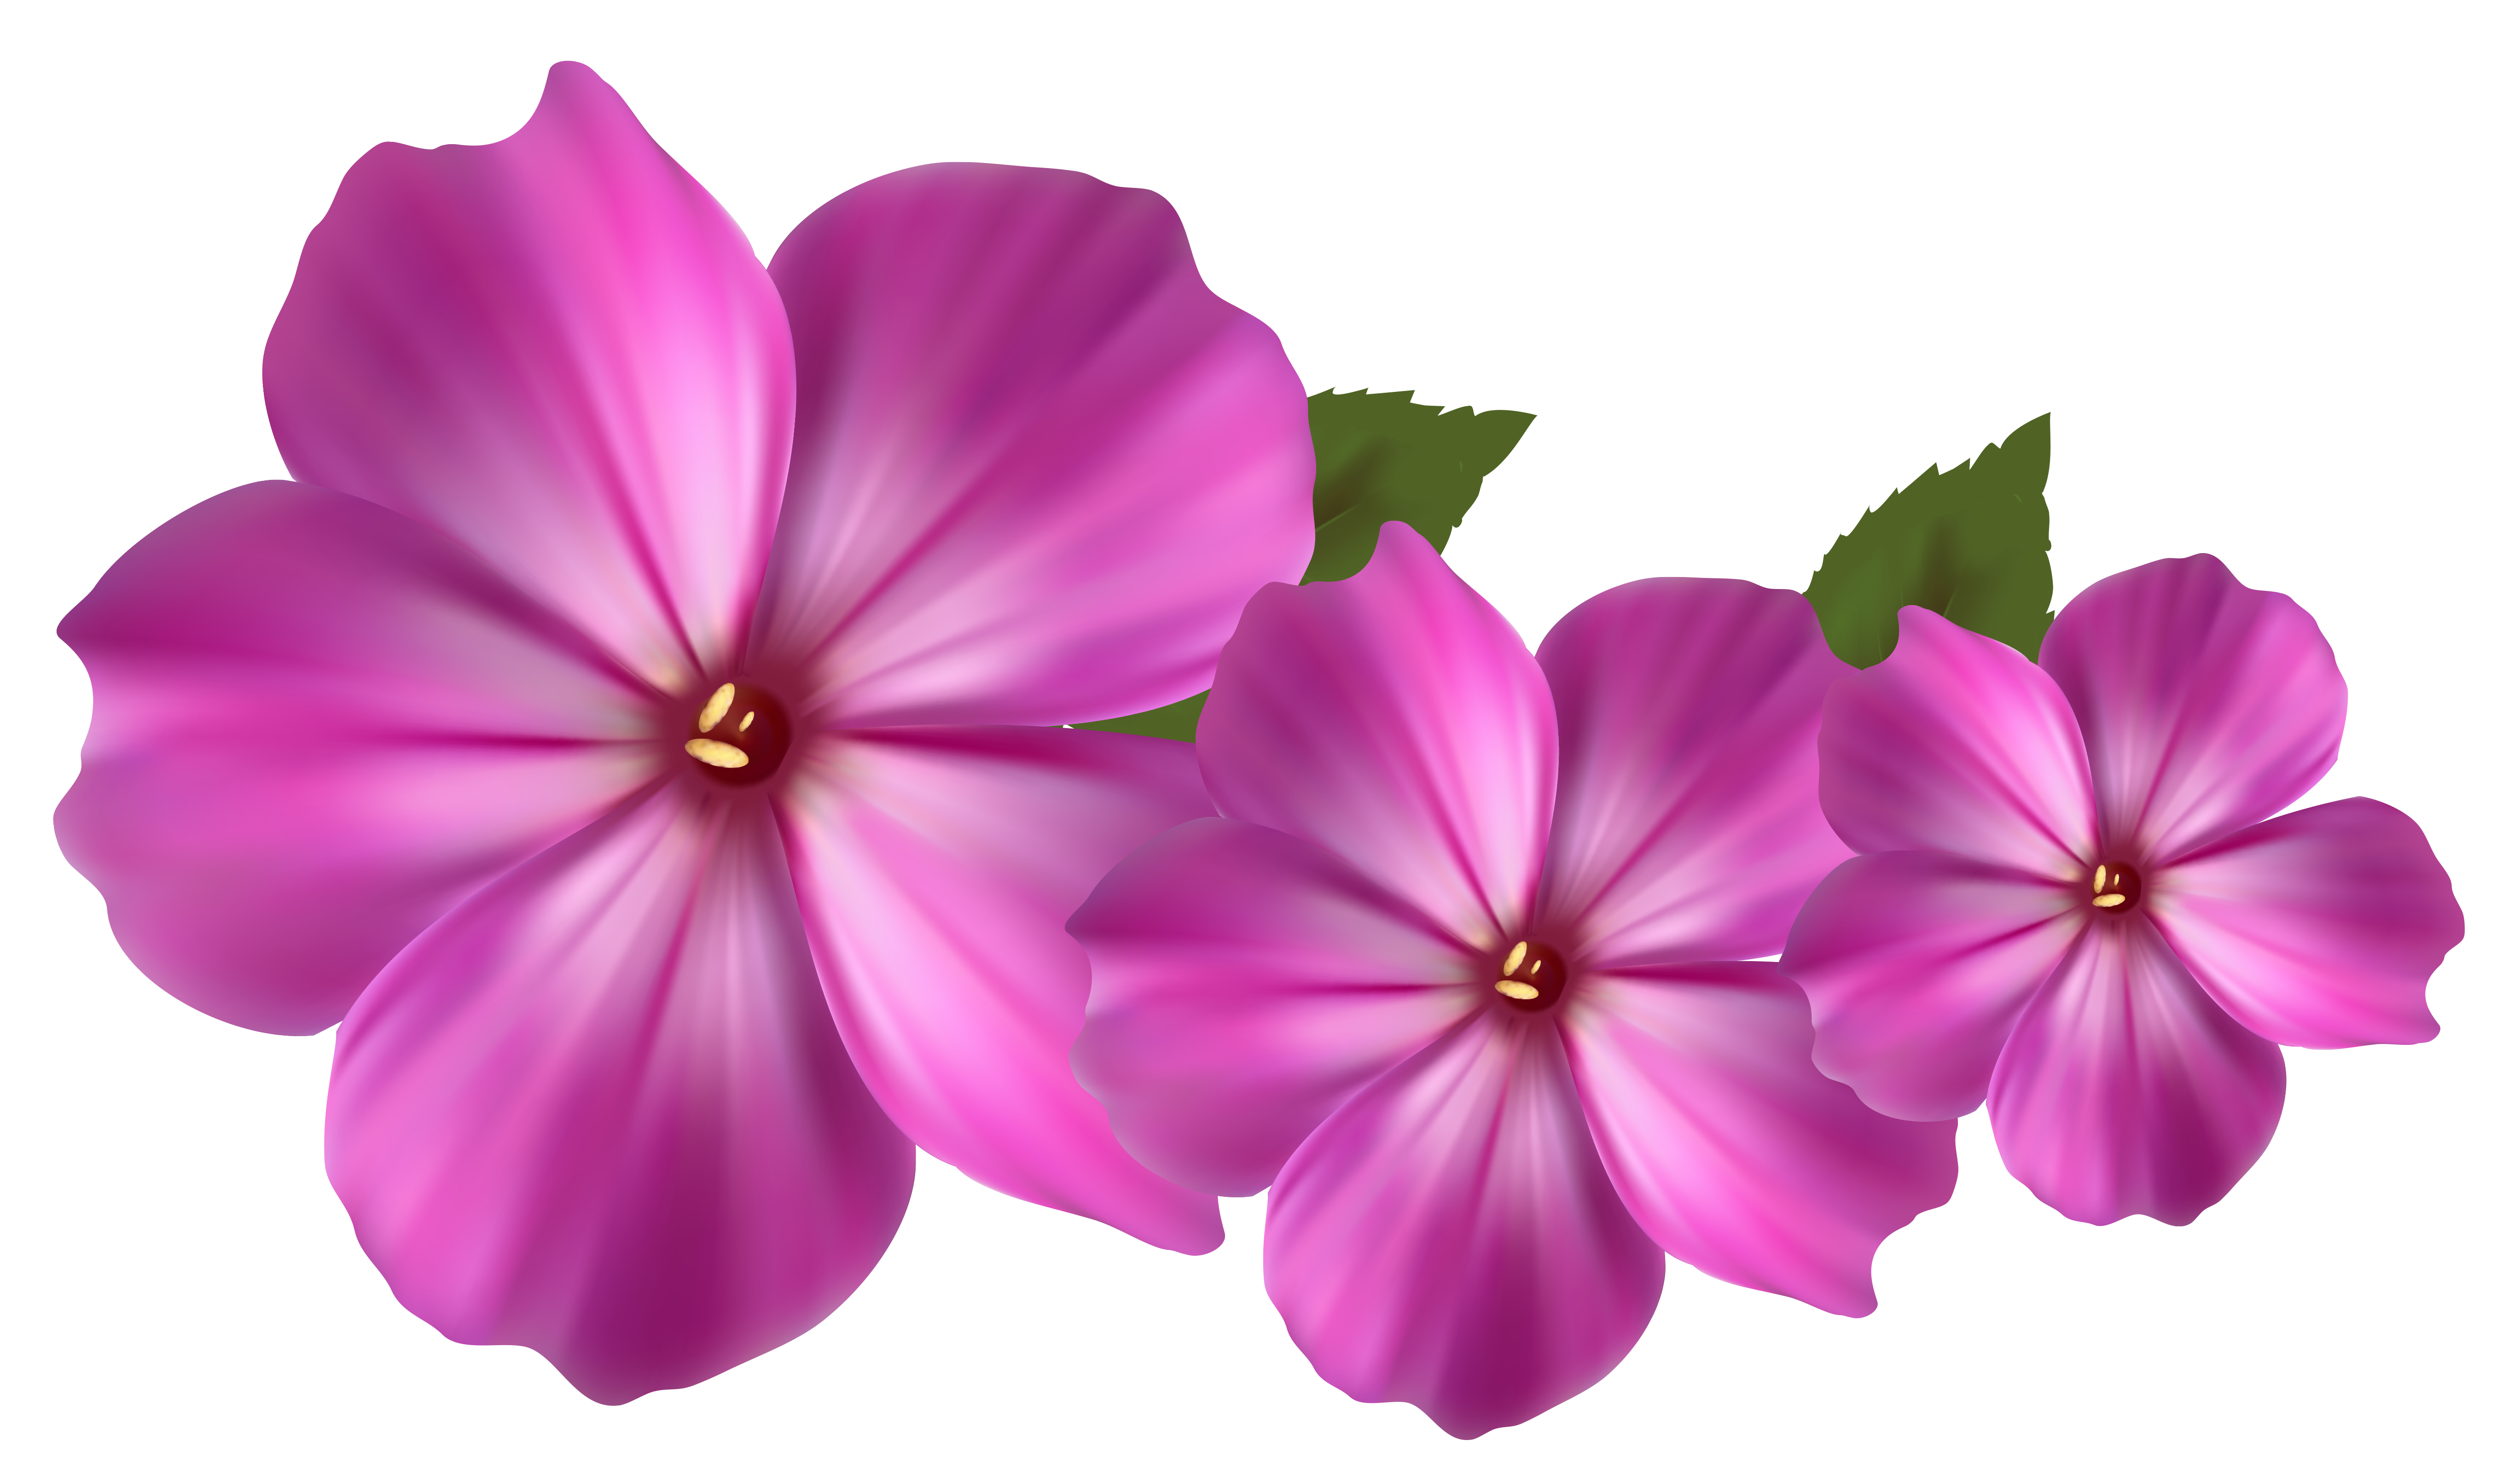 Pink Flower Decor PNG Clipart